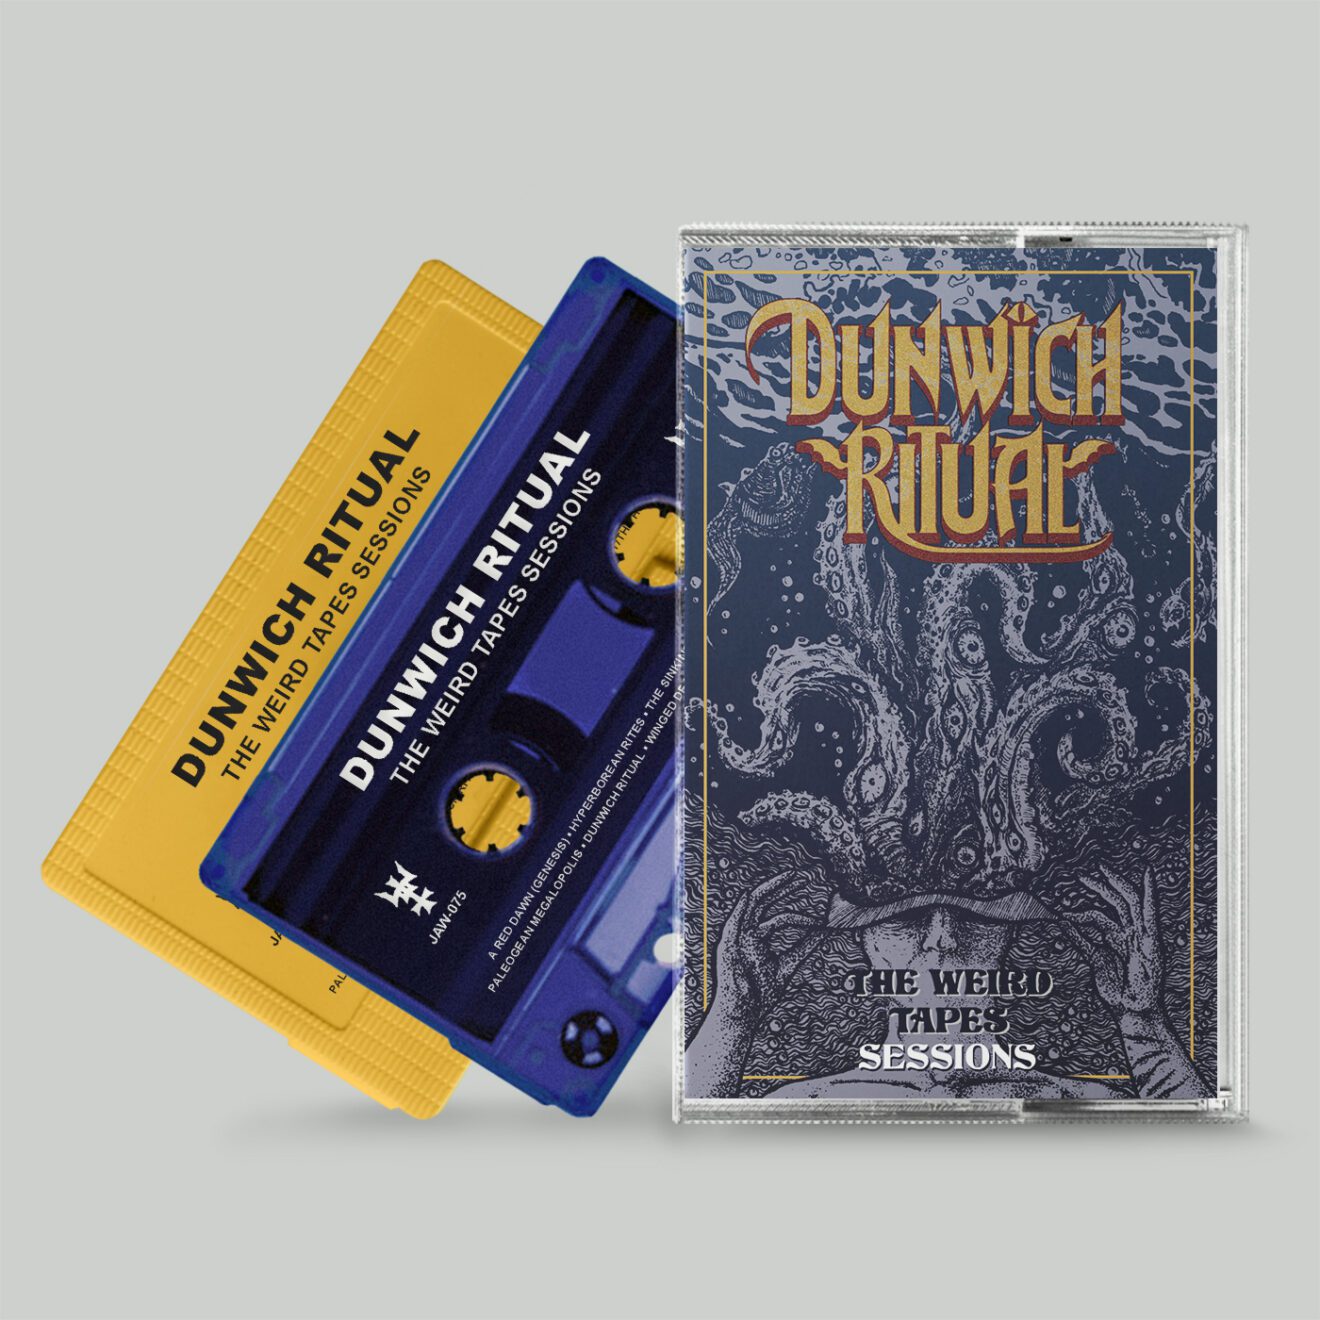 Dunwich Ritual – The Weird Tapes Sessions (Cassette)